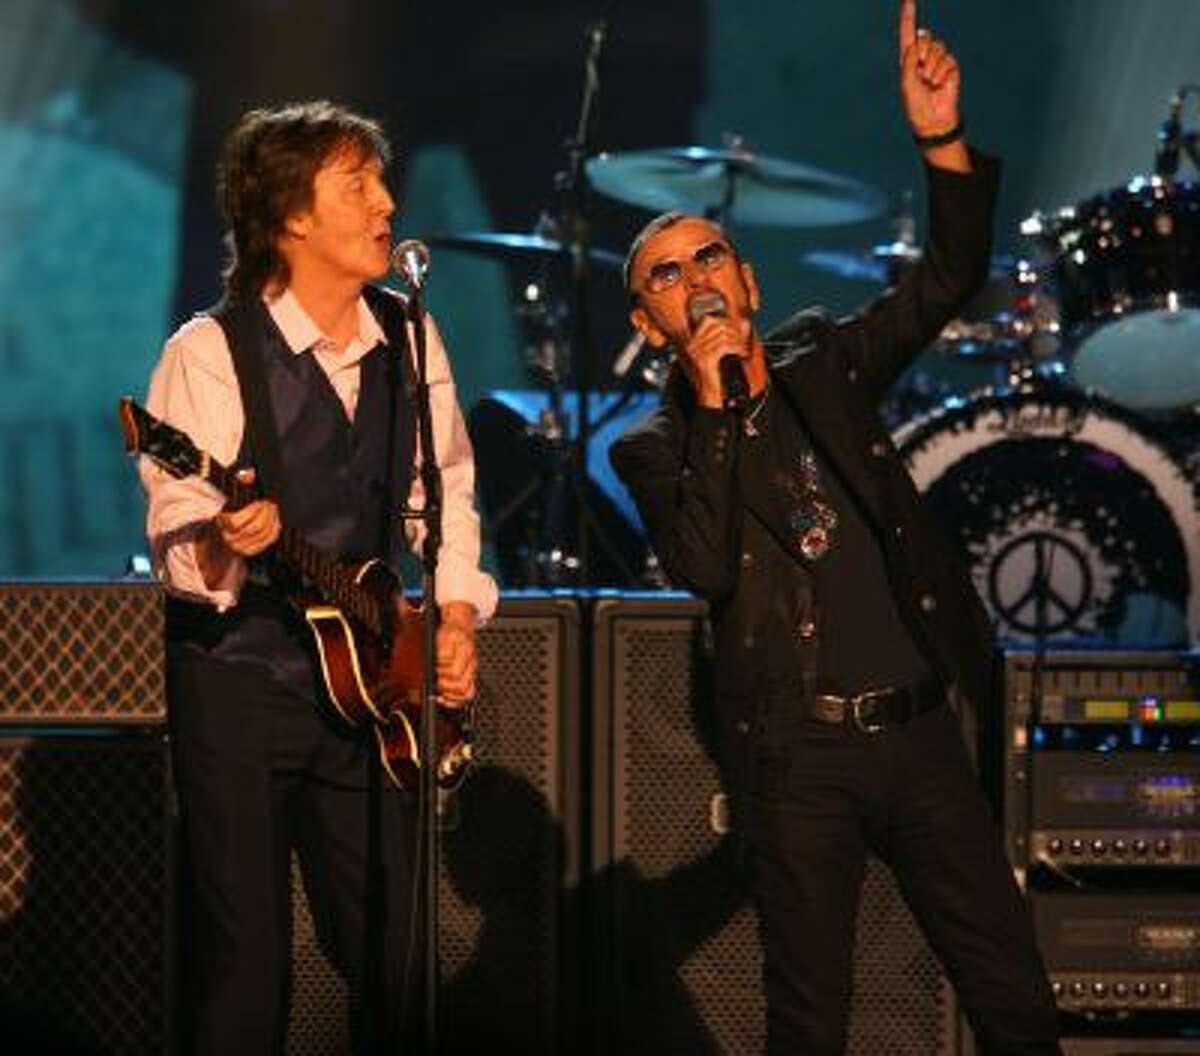 Paul McCartney and Ringo Starr perform at The Night that Changed America: A Grammy Salute to the Beatles, on Monday, Jan. 27, 2014, in Los Angeles.